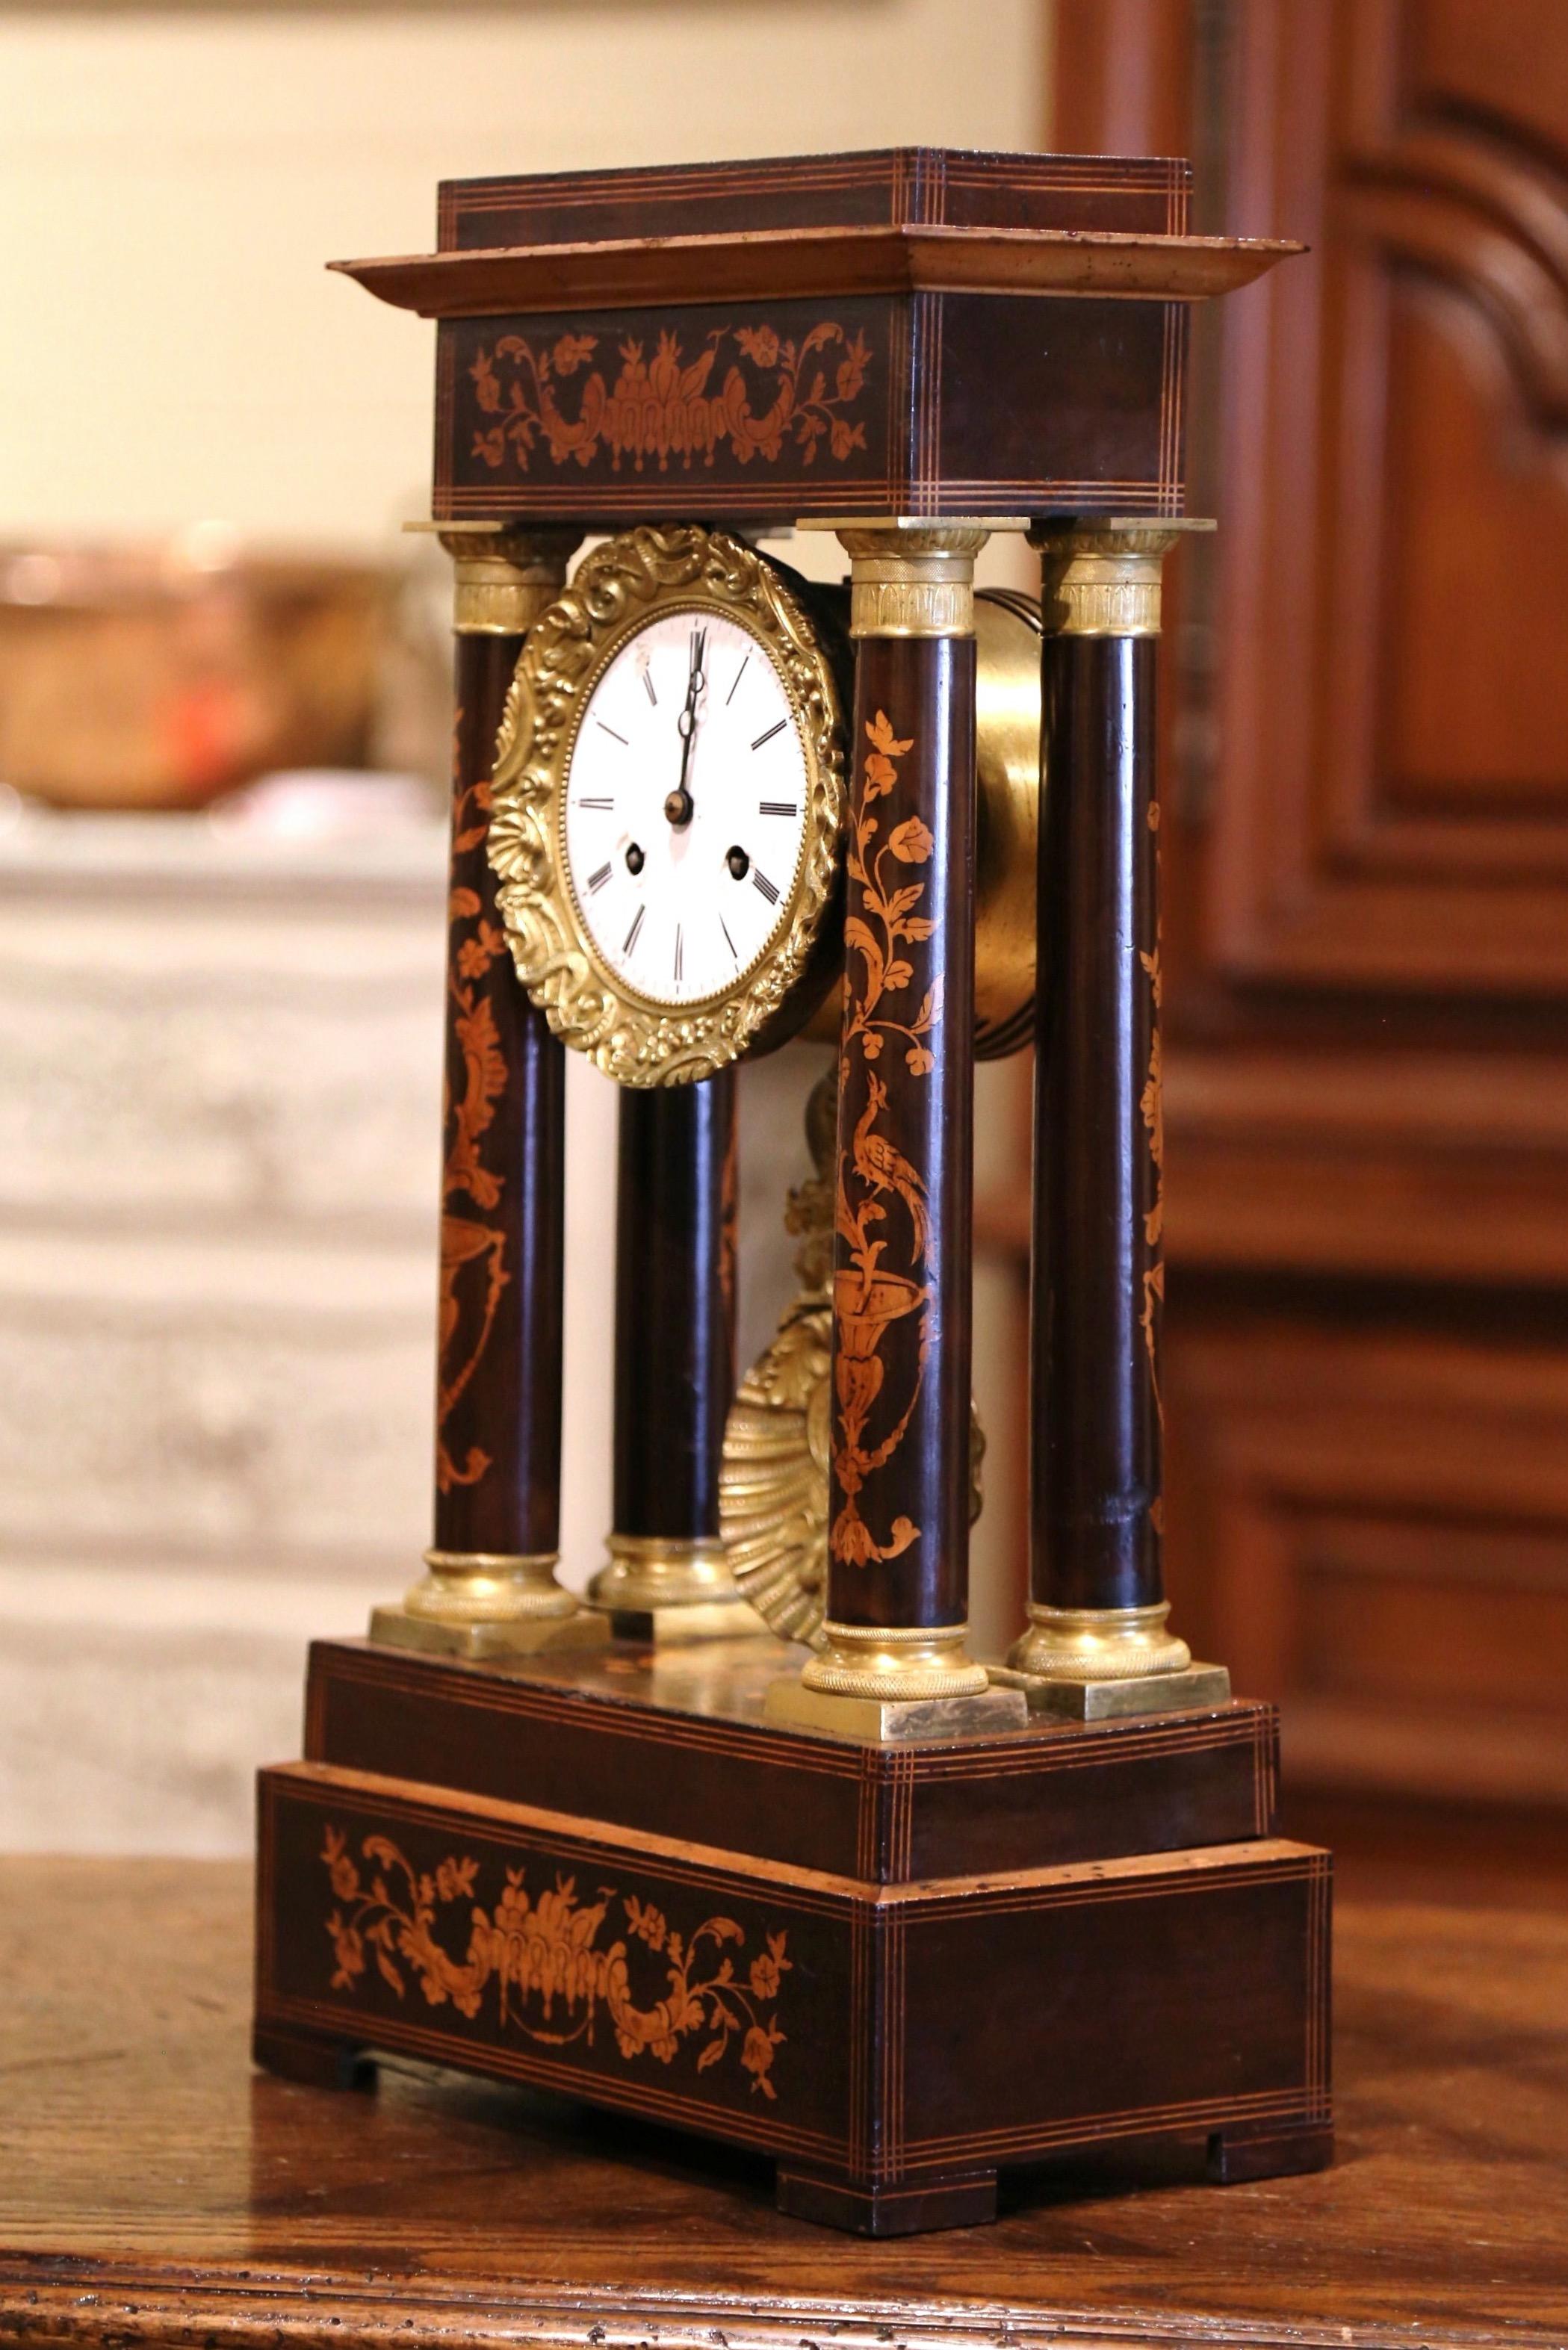 Keep time in your office, study, or atop your mantel with this elegant antique clock. Crafted in France, circa 1860, the sophisticated clock stands on a rectangular plinth base with contrasting foliate marquetry. The clock features four columnar